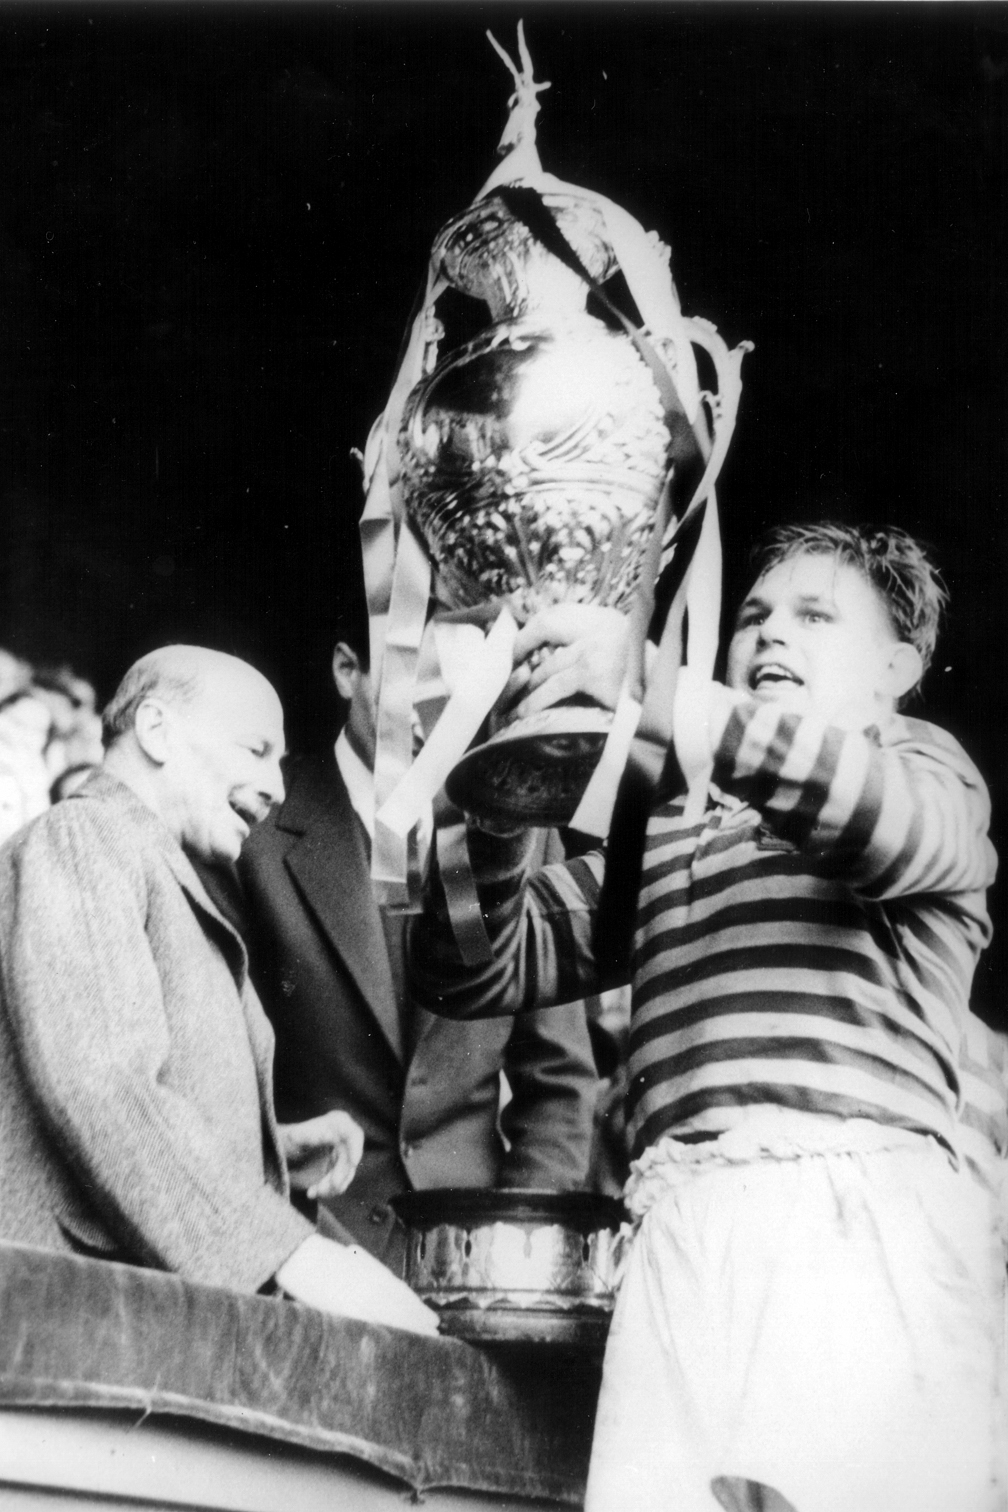 Perfect partners, as Harry Bath is all paired up with the Challenge Cup in 1950